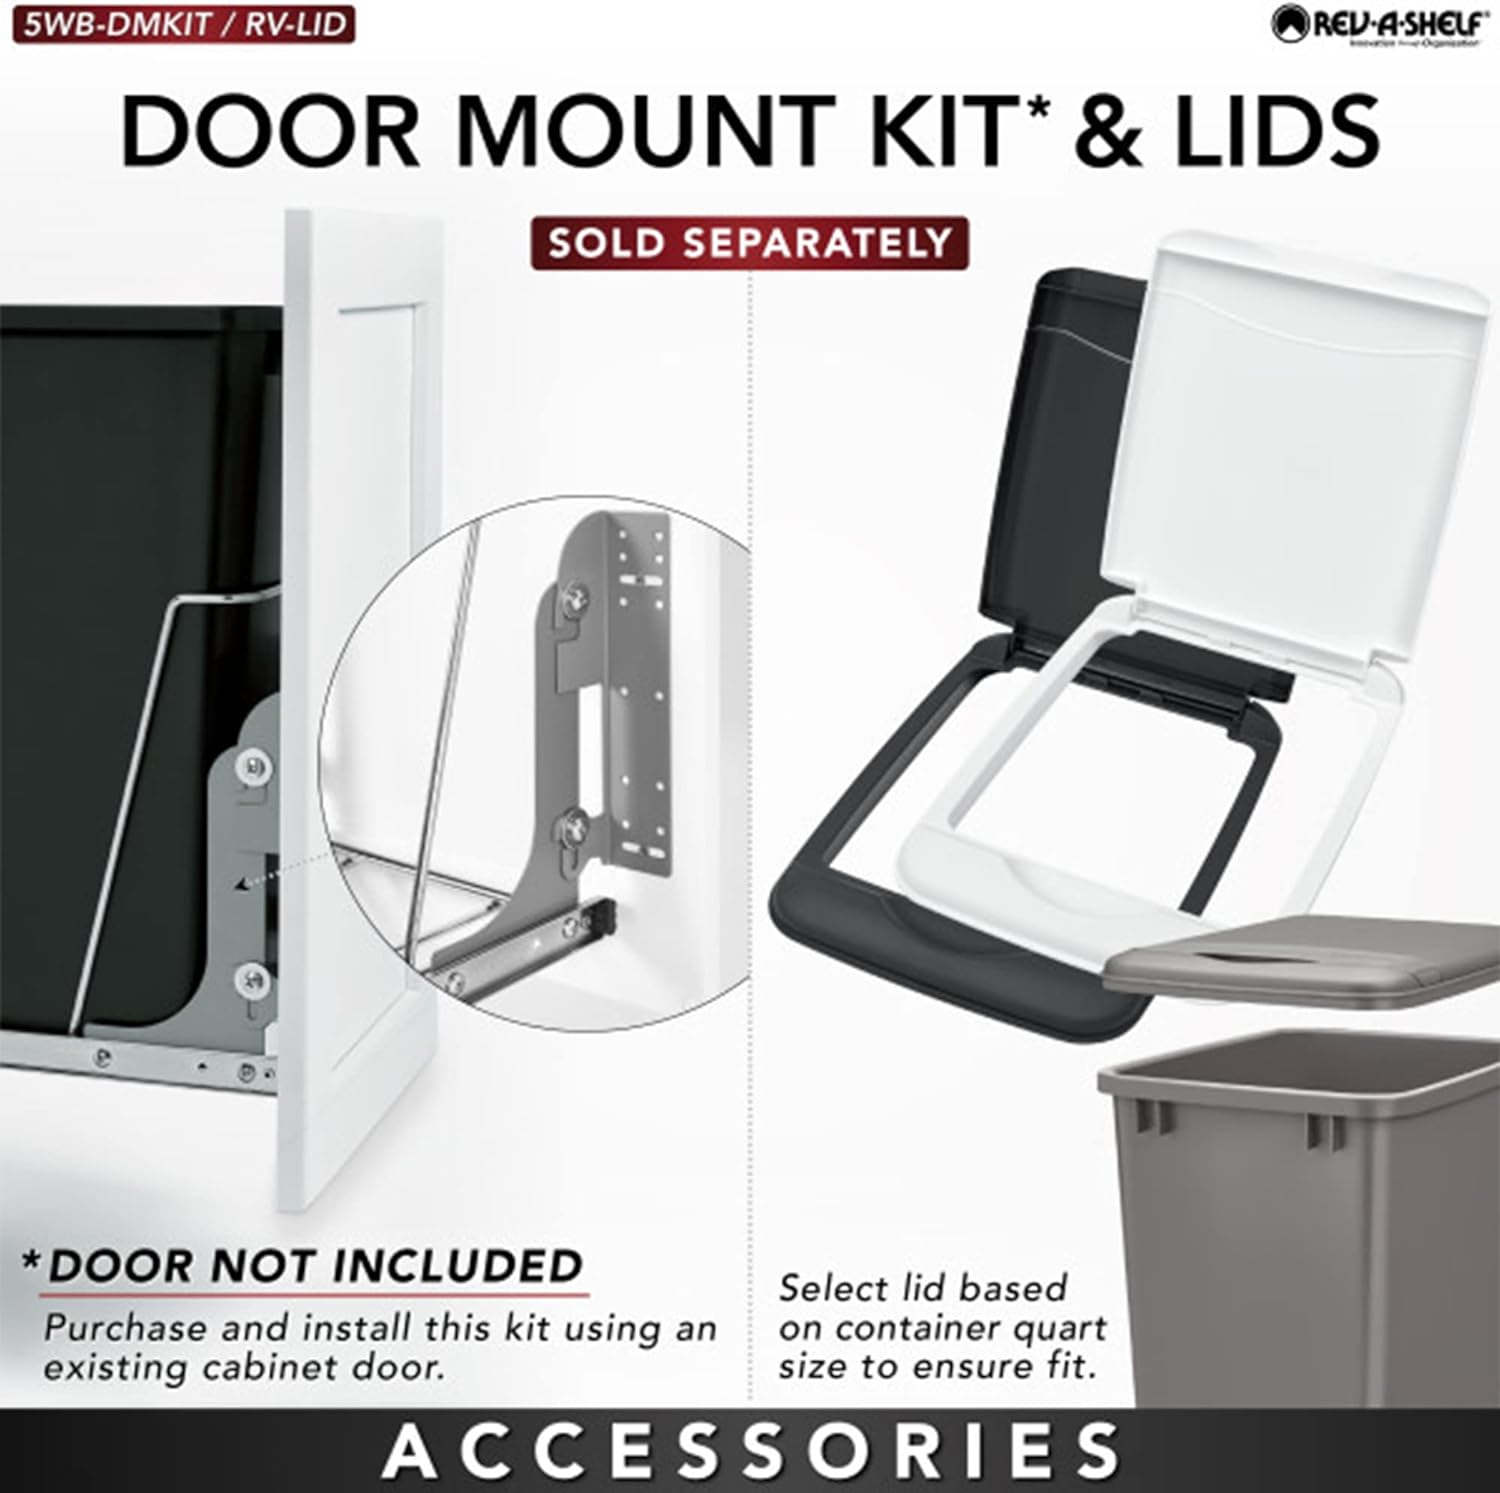 Double 35 qt Pullout Waste Bins